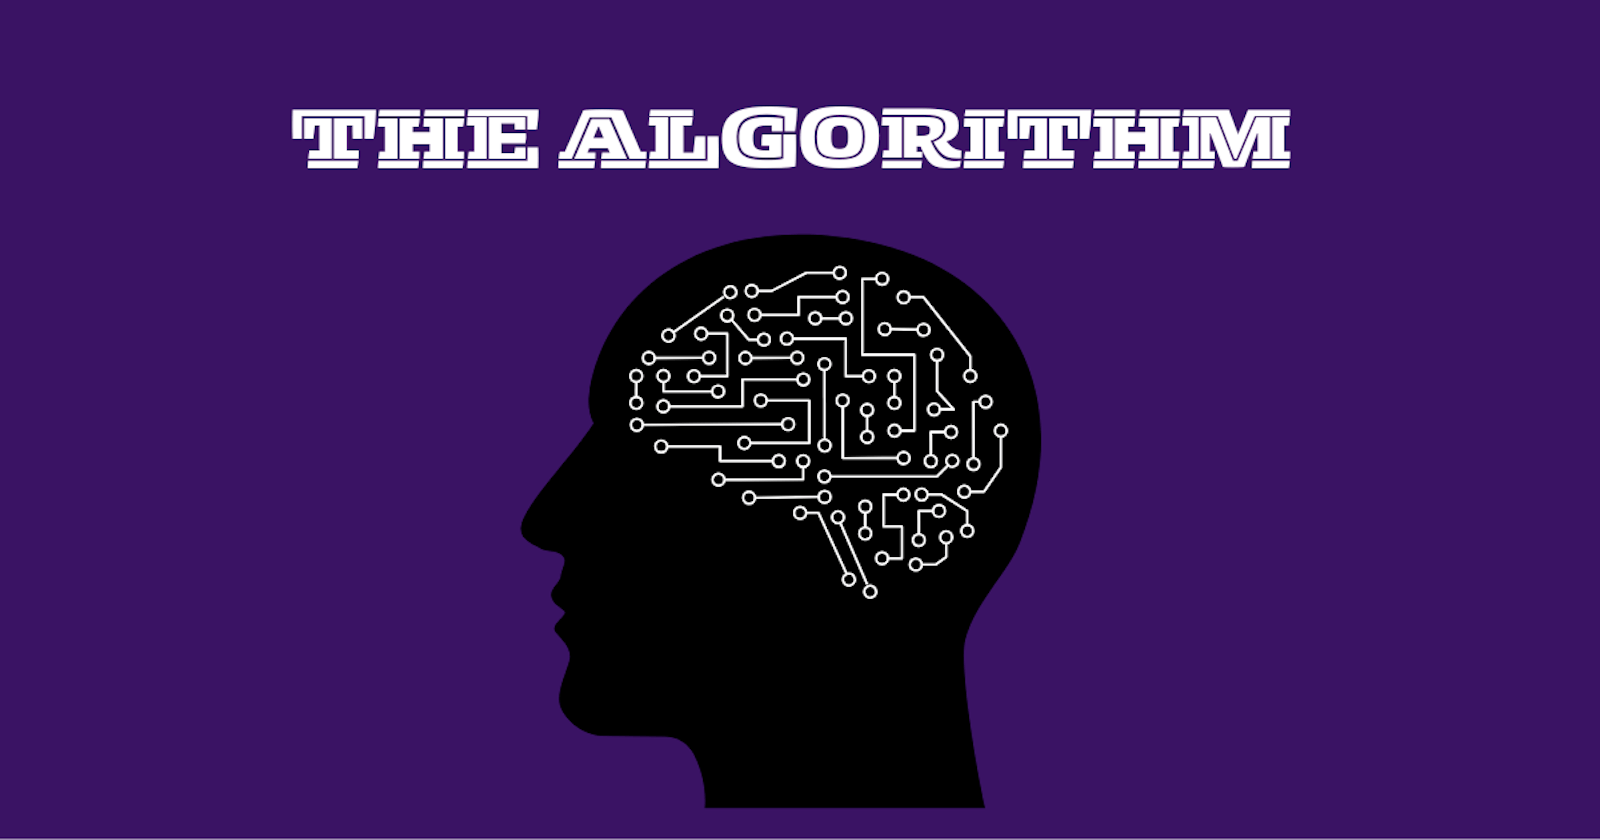 Algorithmic Insights: Efficiency, Applications, and Digital Impact Demystified